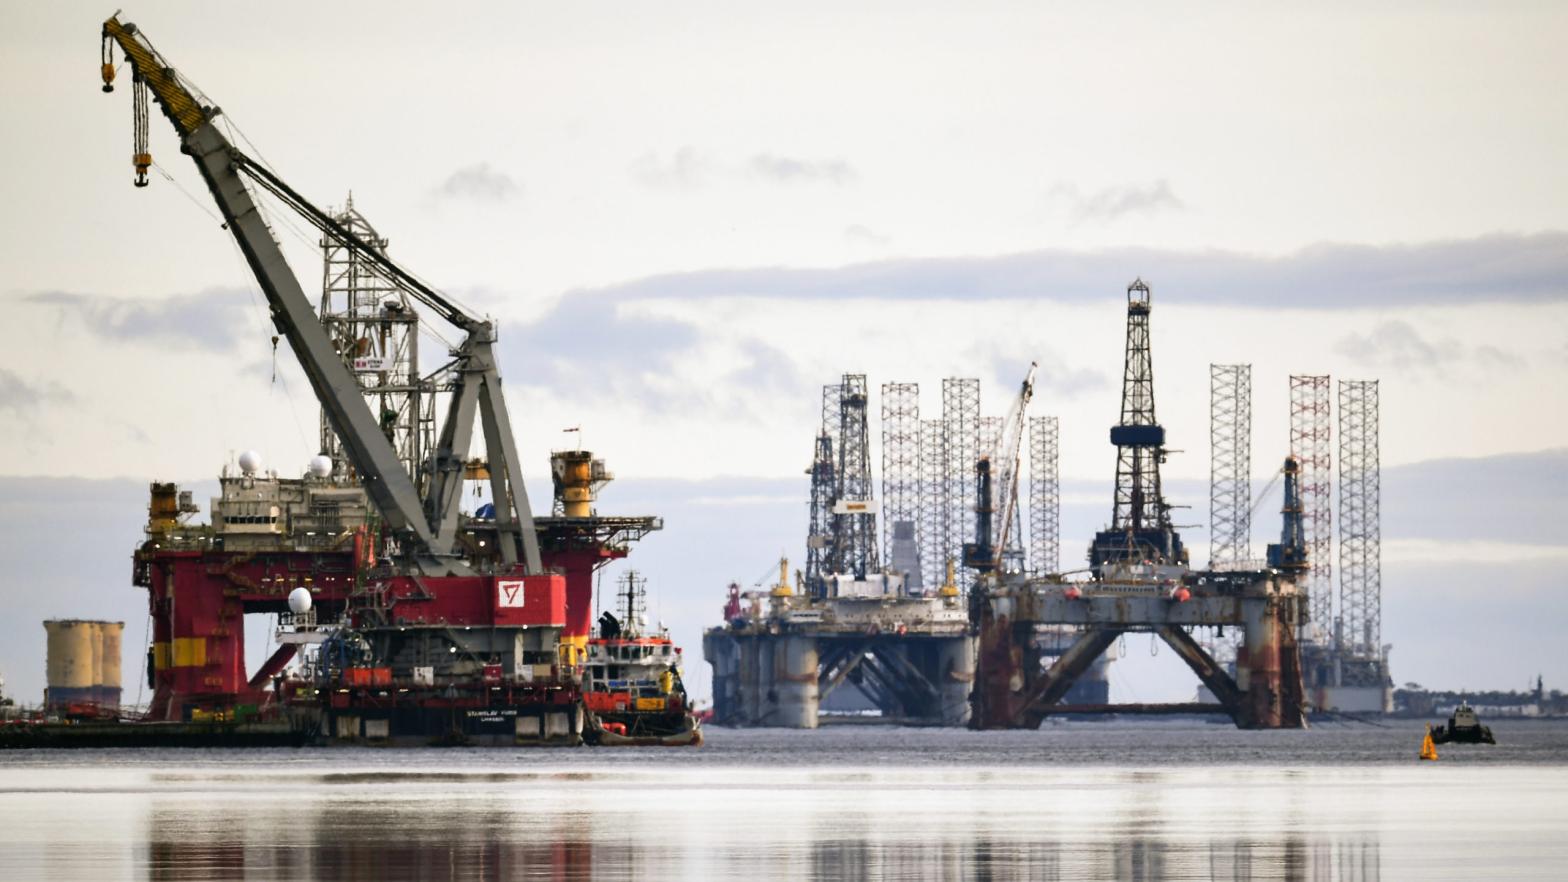 Offshore oil rigs off the coast of Scotland. (Photo: Jeff J. Mitchell, Getty Images)